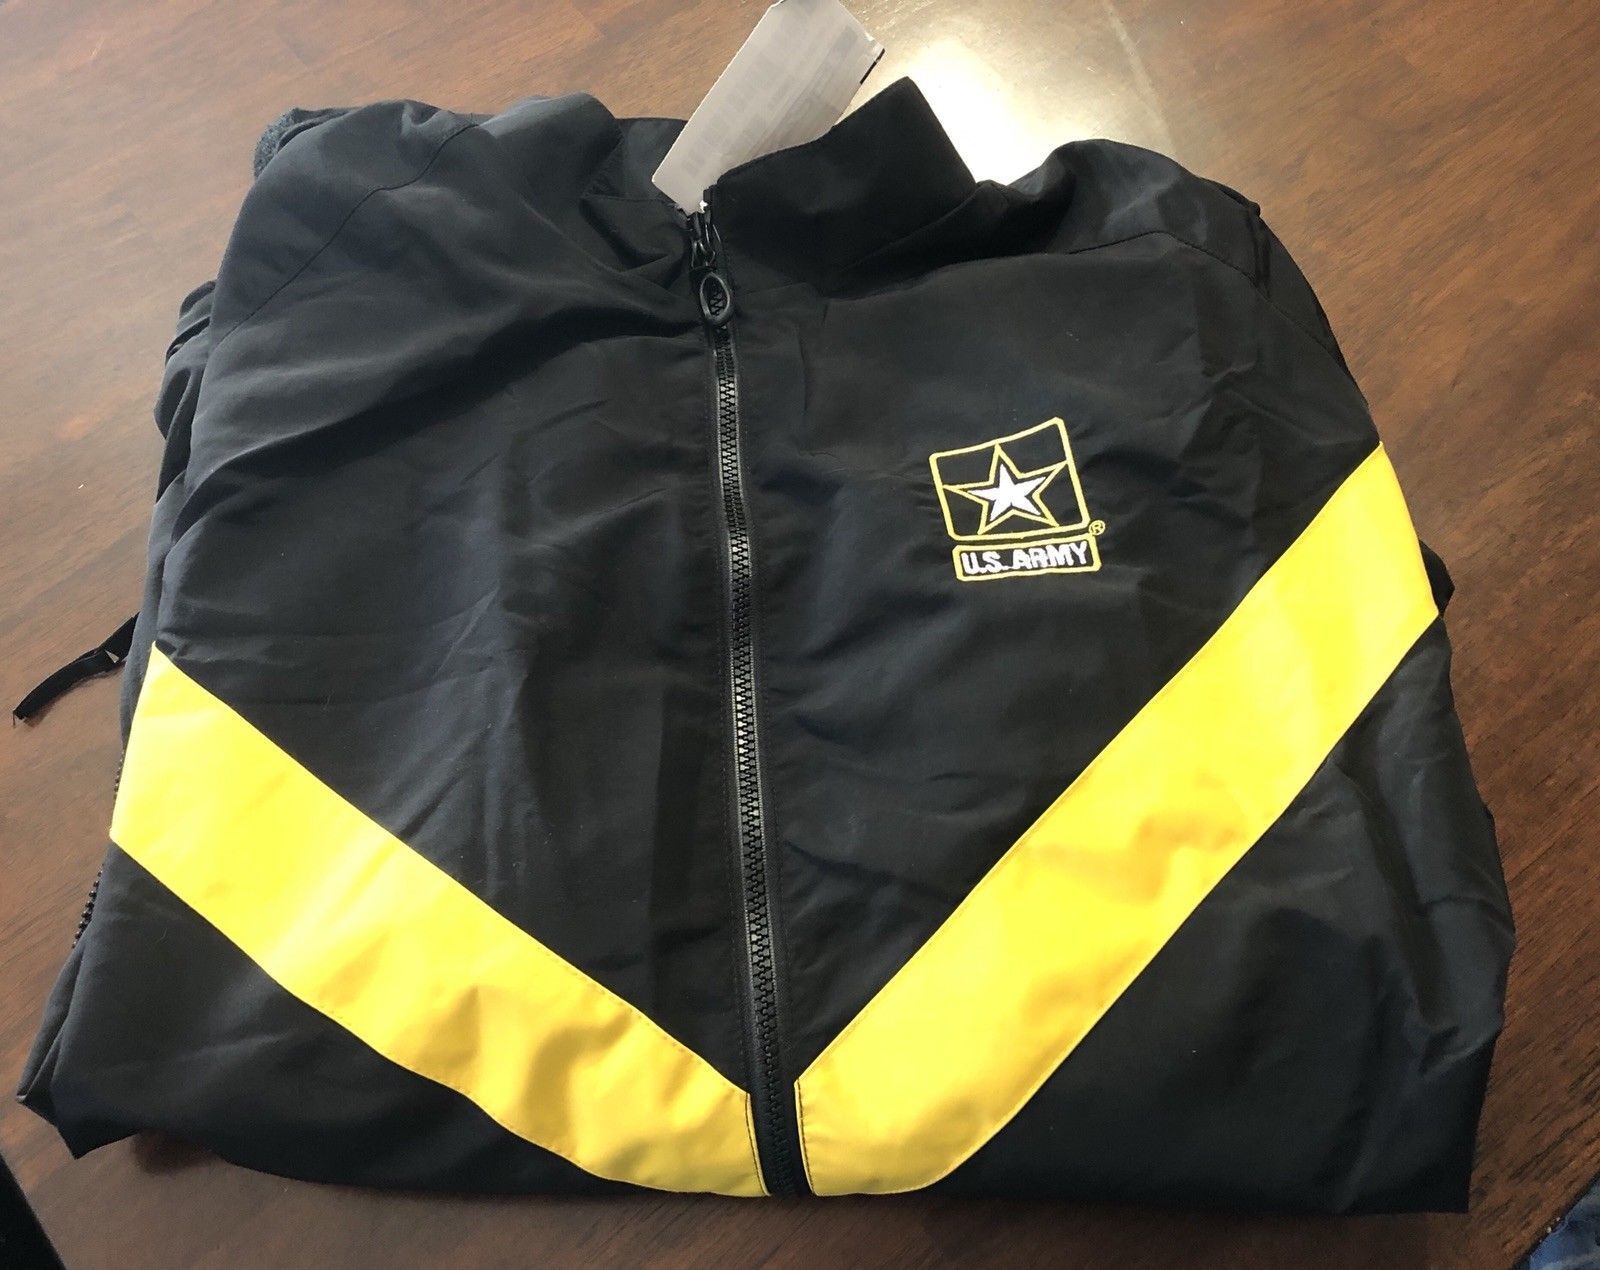 New US Army APFU  Army Physical Fitness  Jacket Black & Gold-Women's XSmall/R